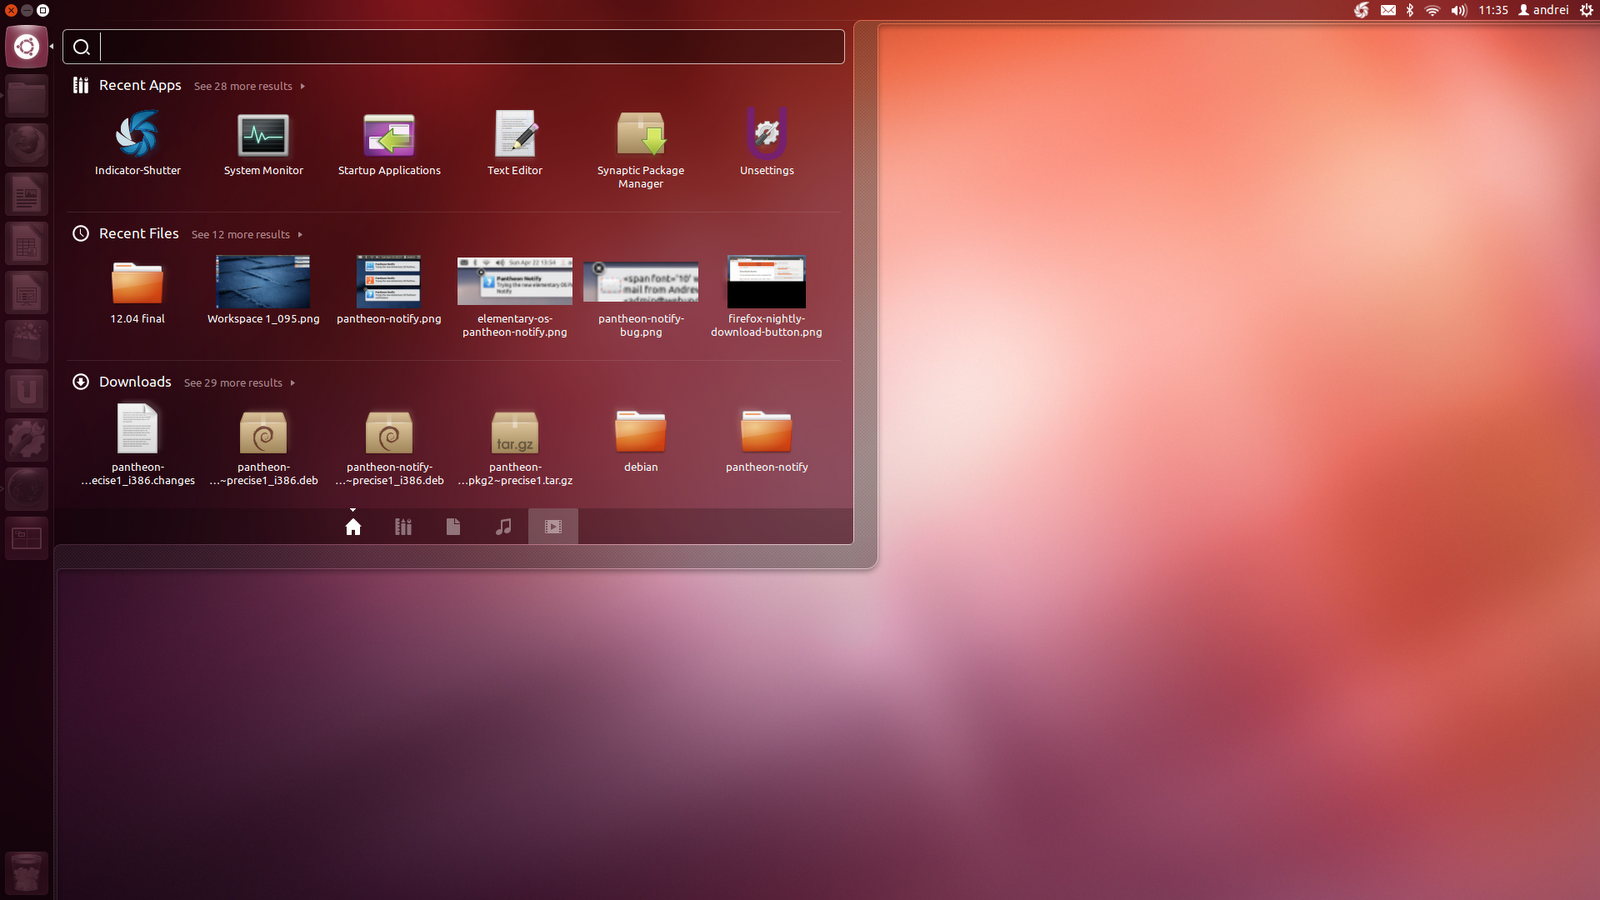 Ubuntu 12.04 LTS Precise Pangolin Released - Lets Download and Install it